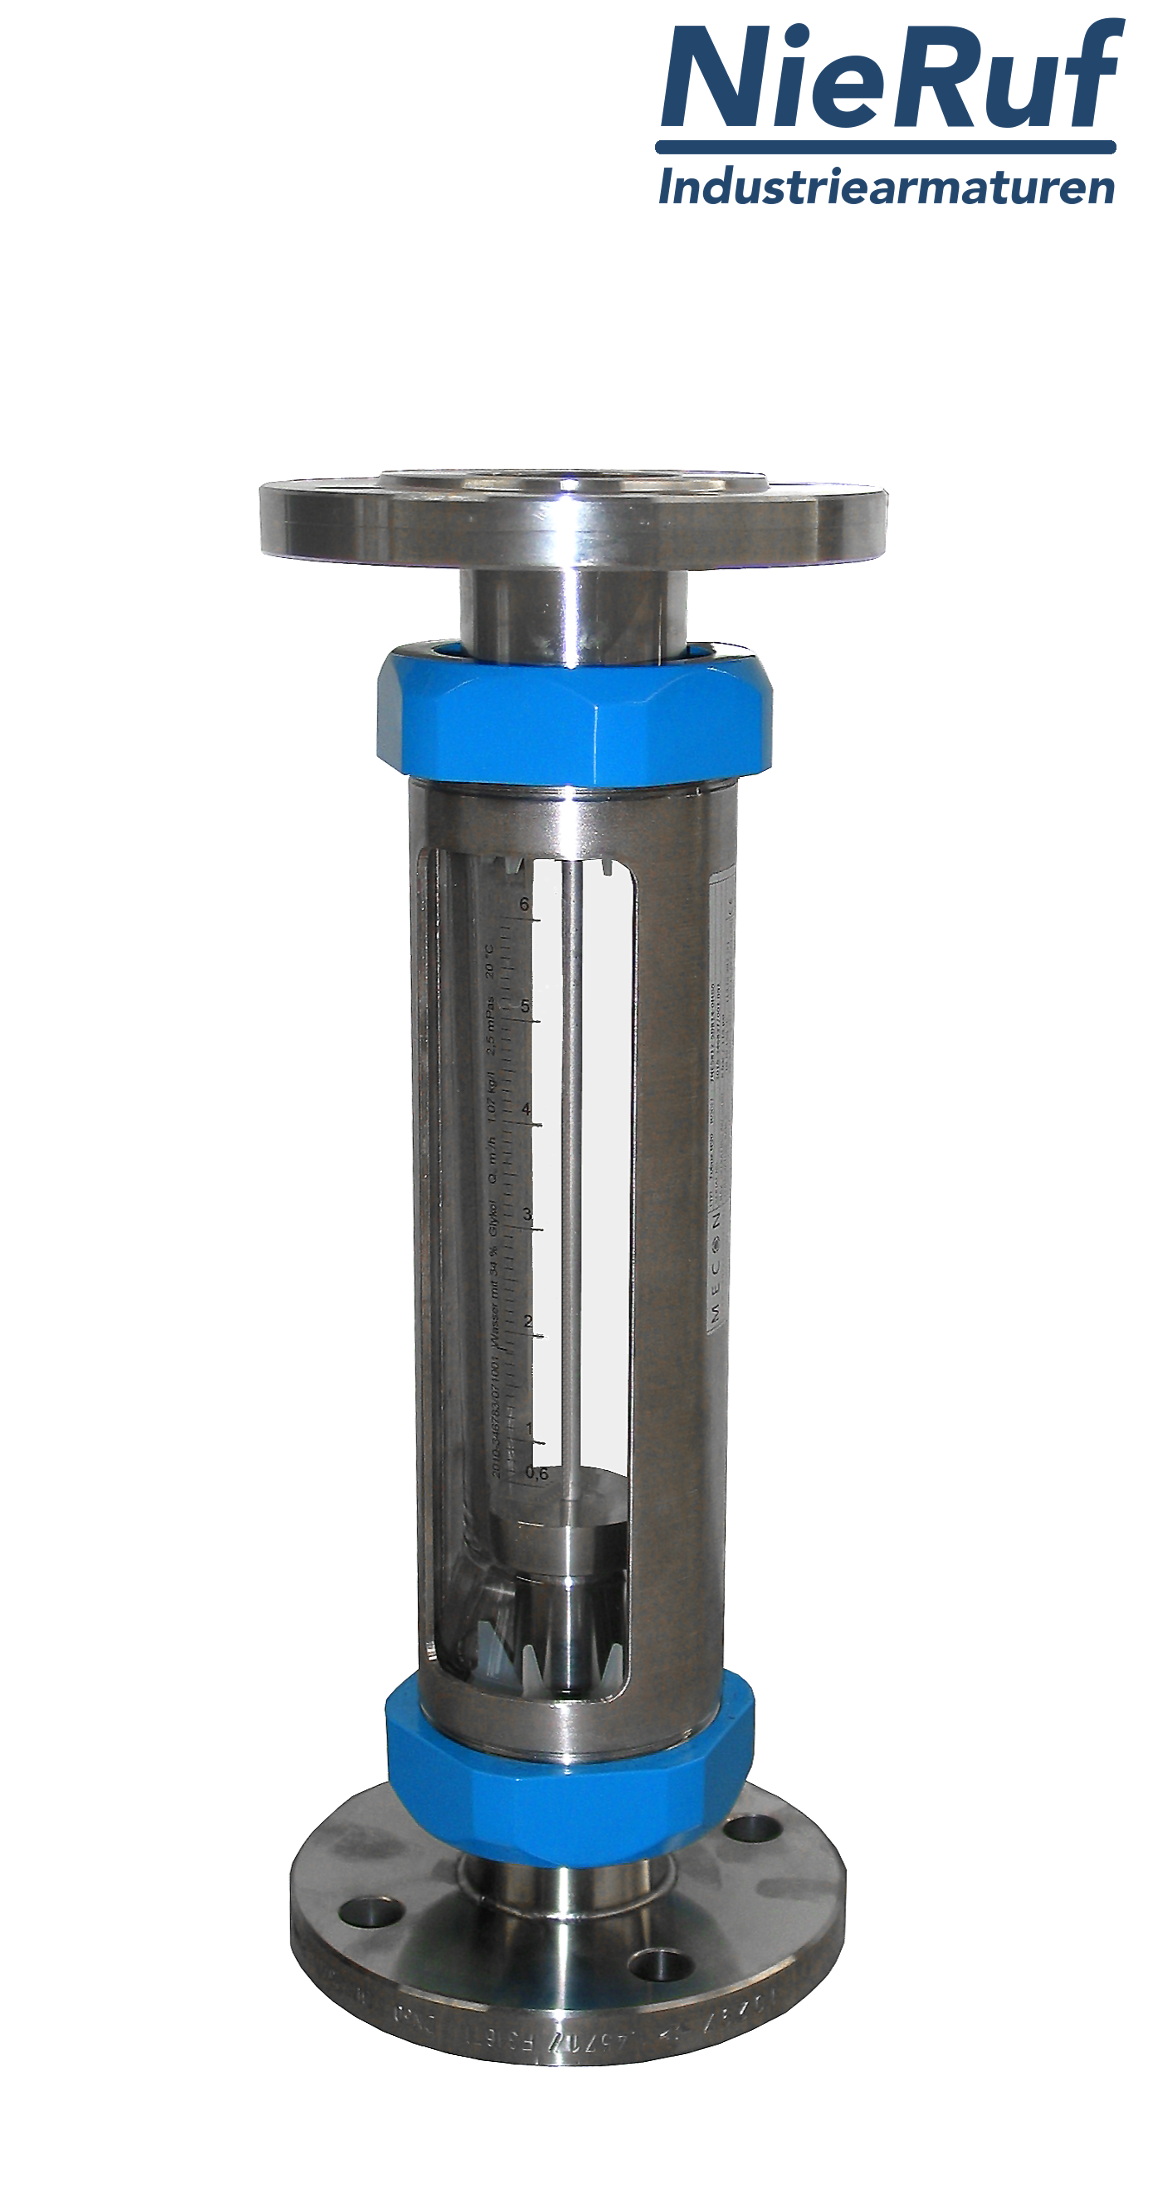 Variable area flowmeter stainless steel + borosilicate flange DN40 160.0 - 1600 l/h water FKM